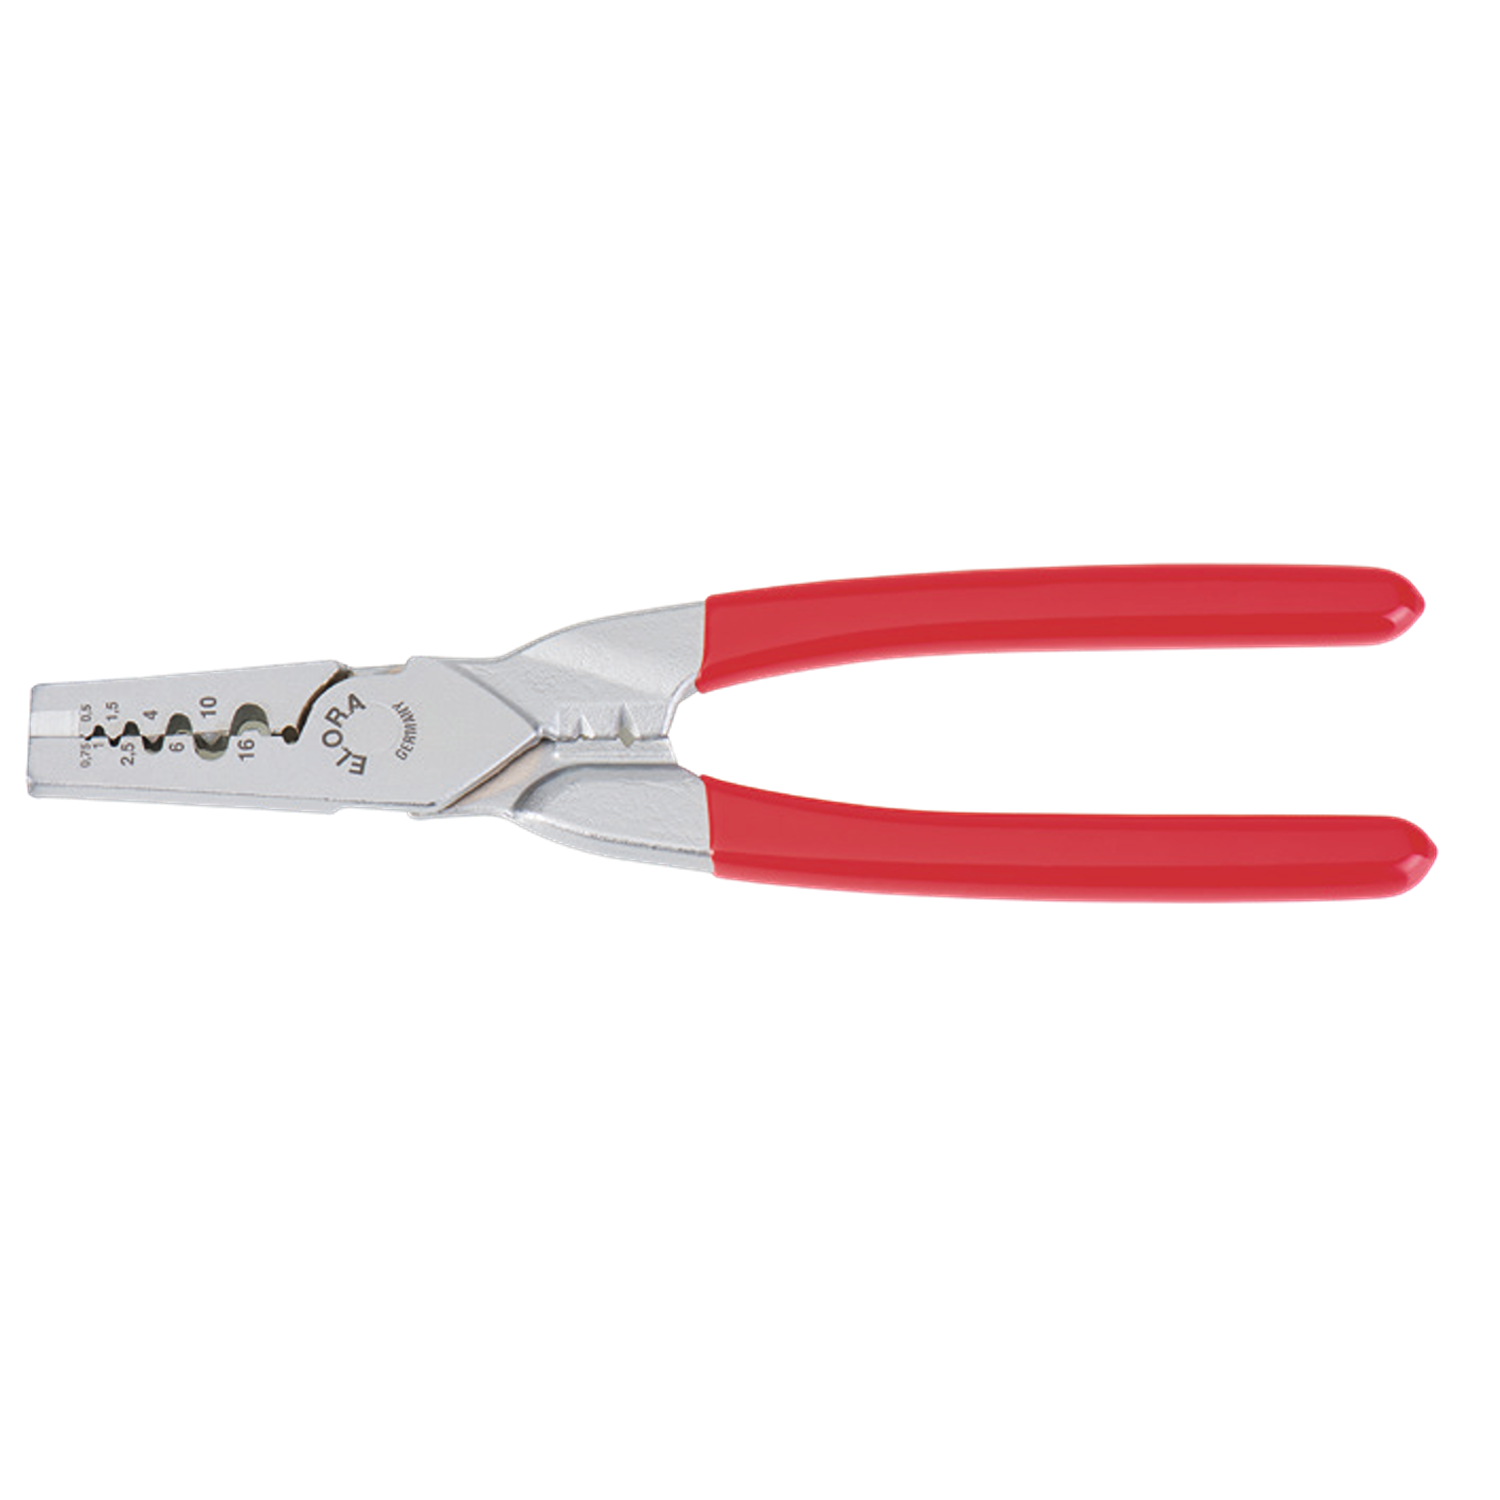 ELORA 466A Cable End Sleeve Plier (ELORA Tools) - Premium Sleeve Plier from ELORA - Shop now at Yew Aik.